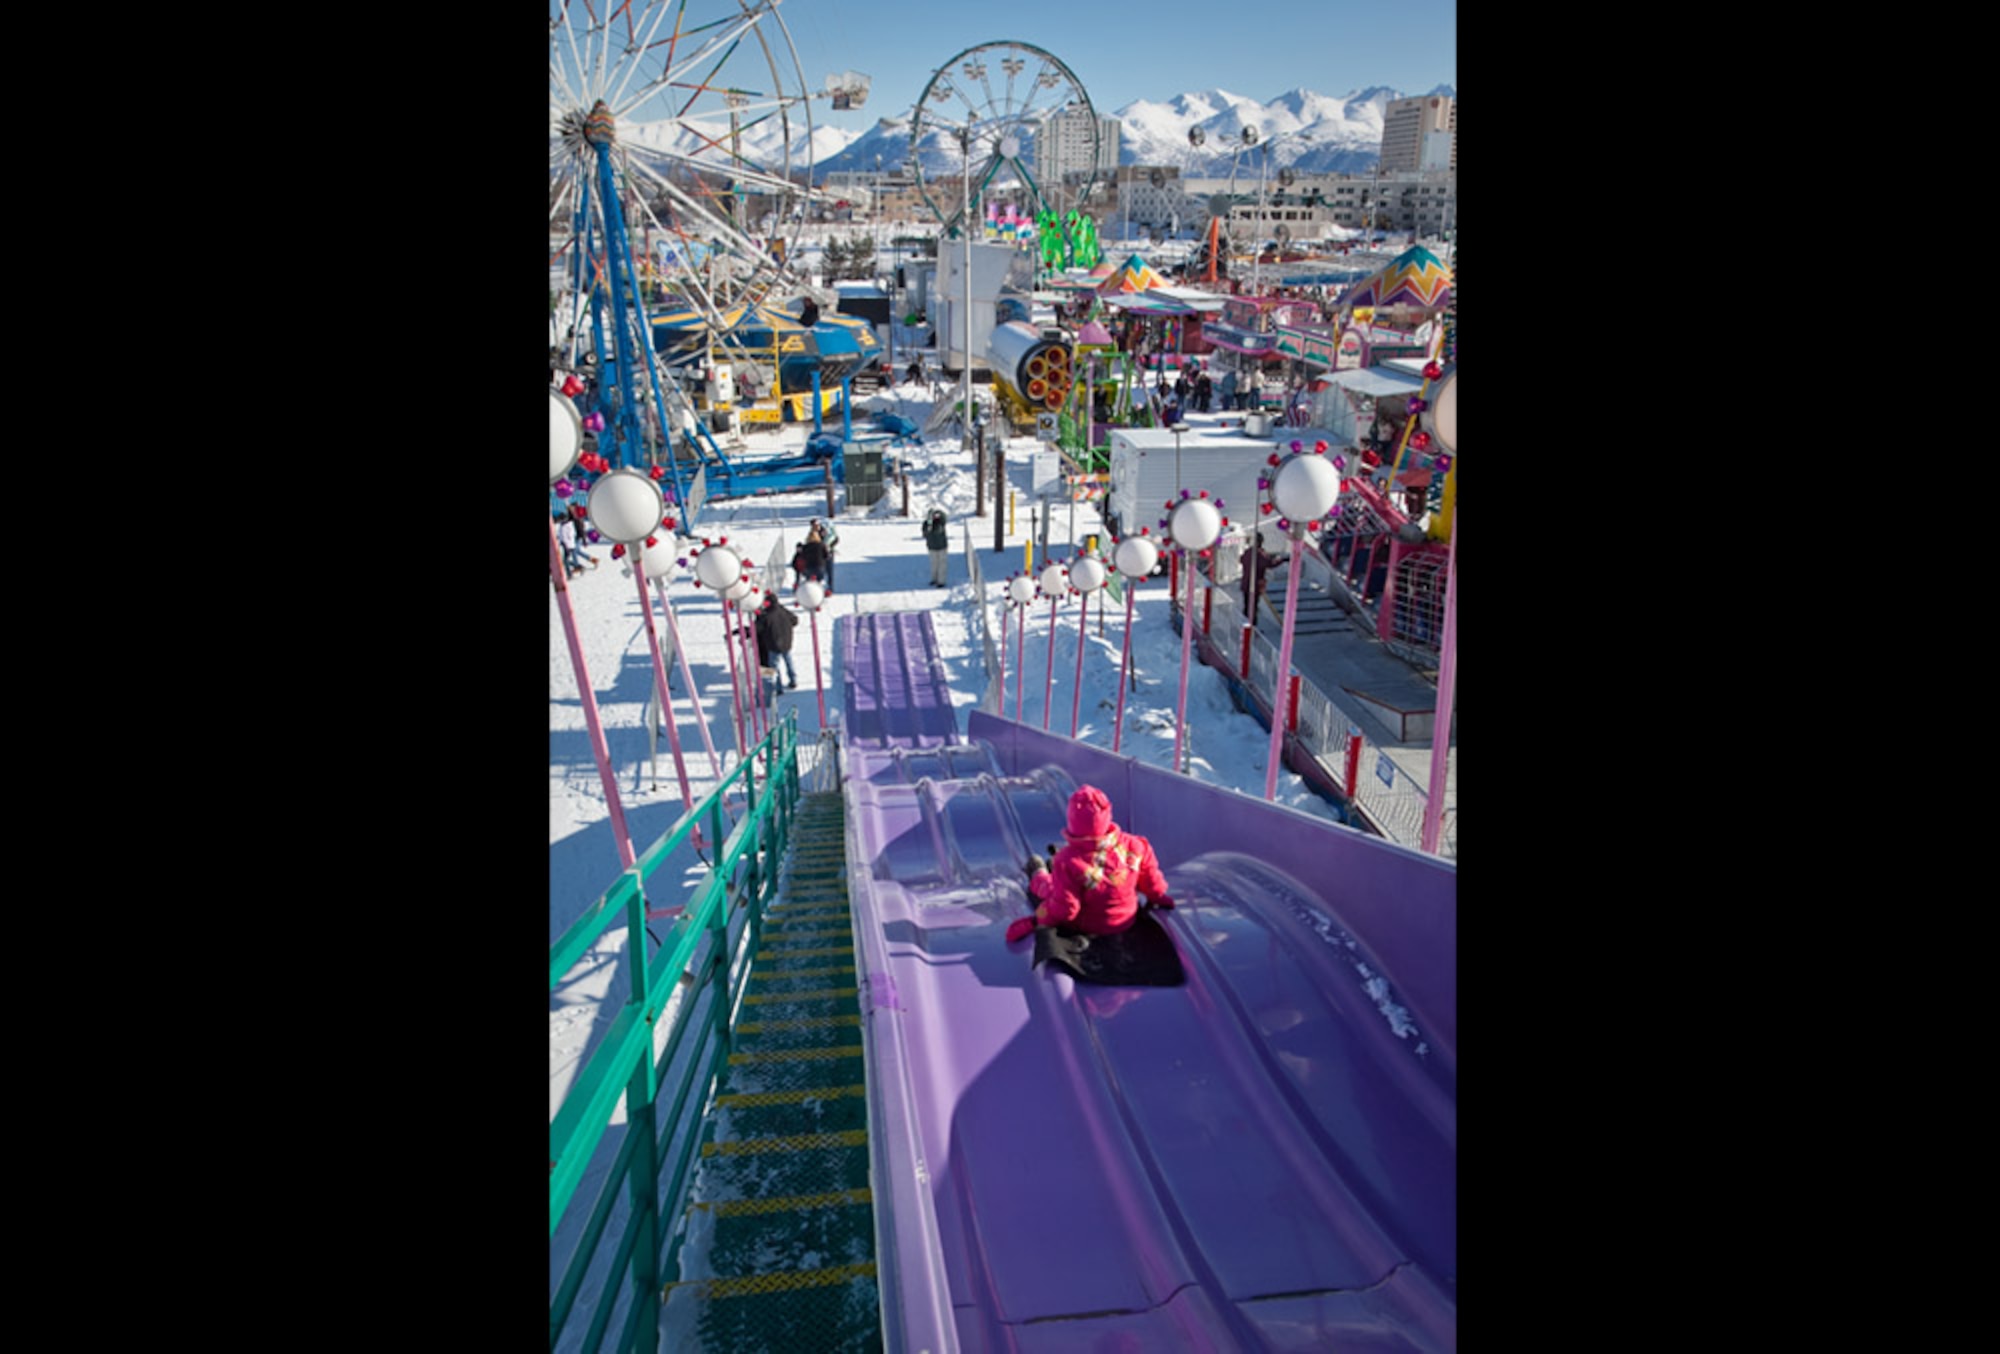 The Rondy carnival takes place in downtown Anchorage, Alaska, offering rides games and treats for all ages as part of Fur Rendezvous. The 12-day annual festival began as a three-day event arranged to coincide with the return of miners and trappers loaded down with the profits of a winter’s worth of work.